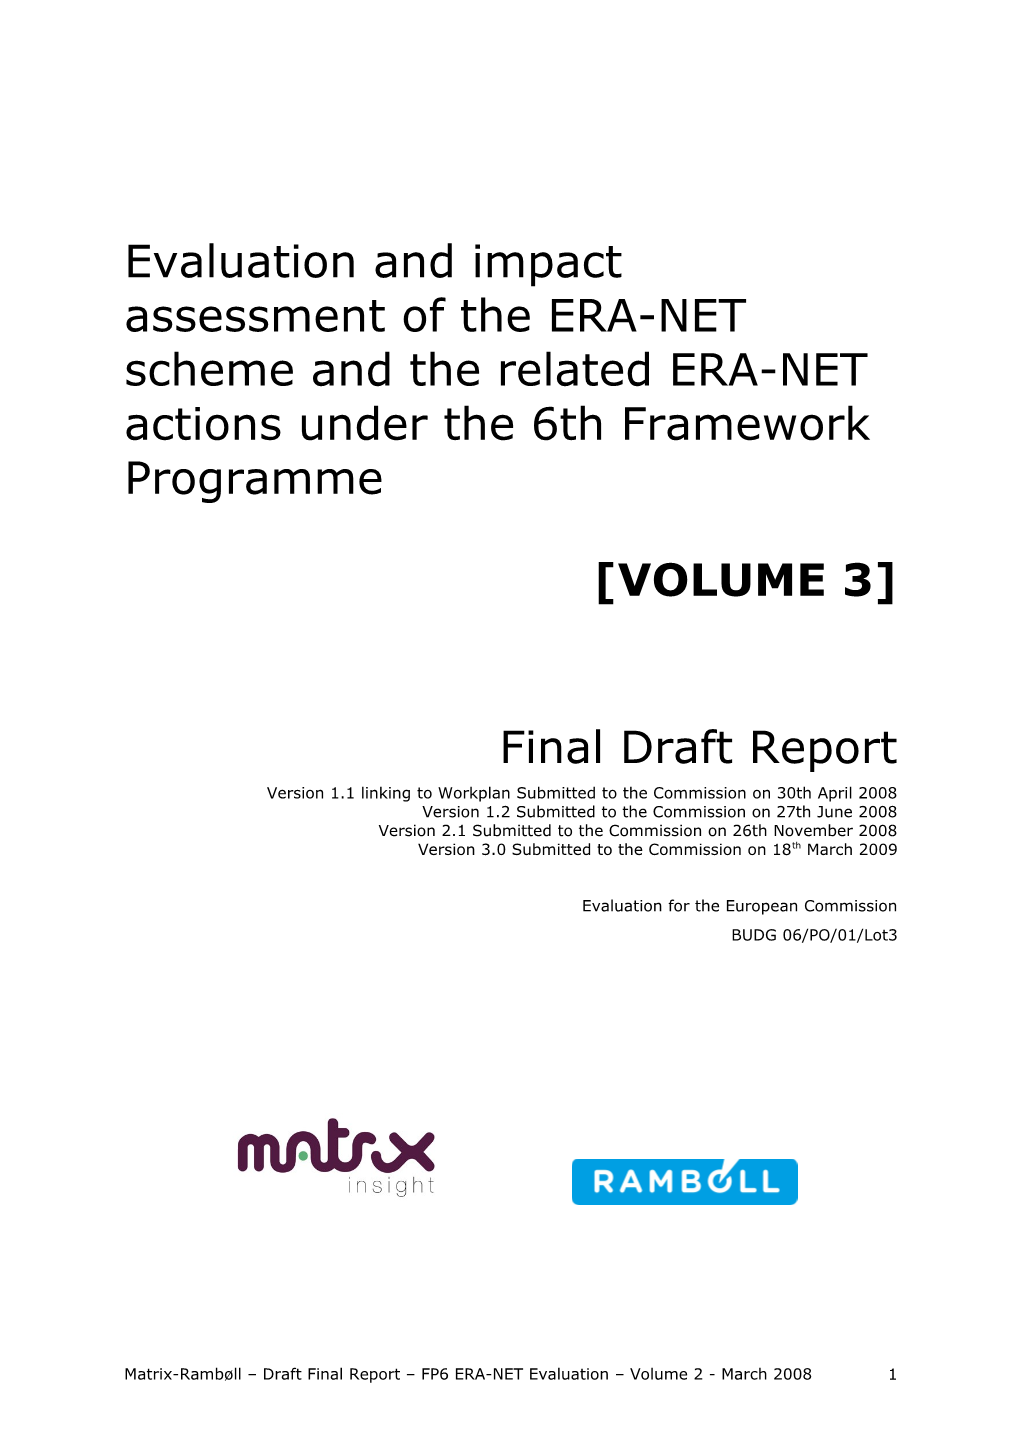 Evaluation and Impact Assessment of the ERA-NET Scheme and the Related ERA-NET Actions